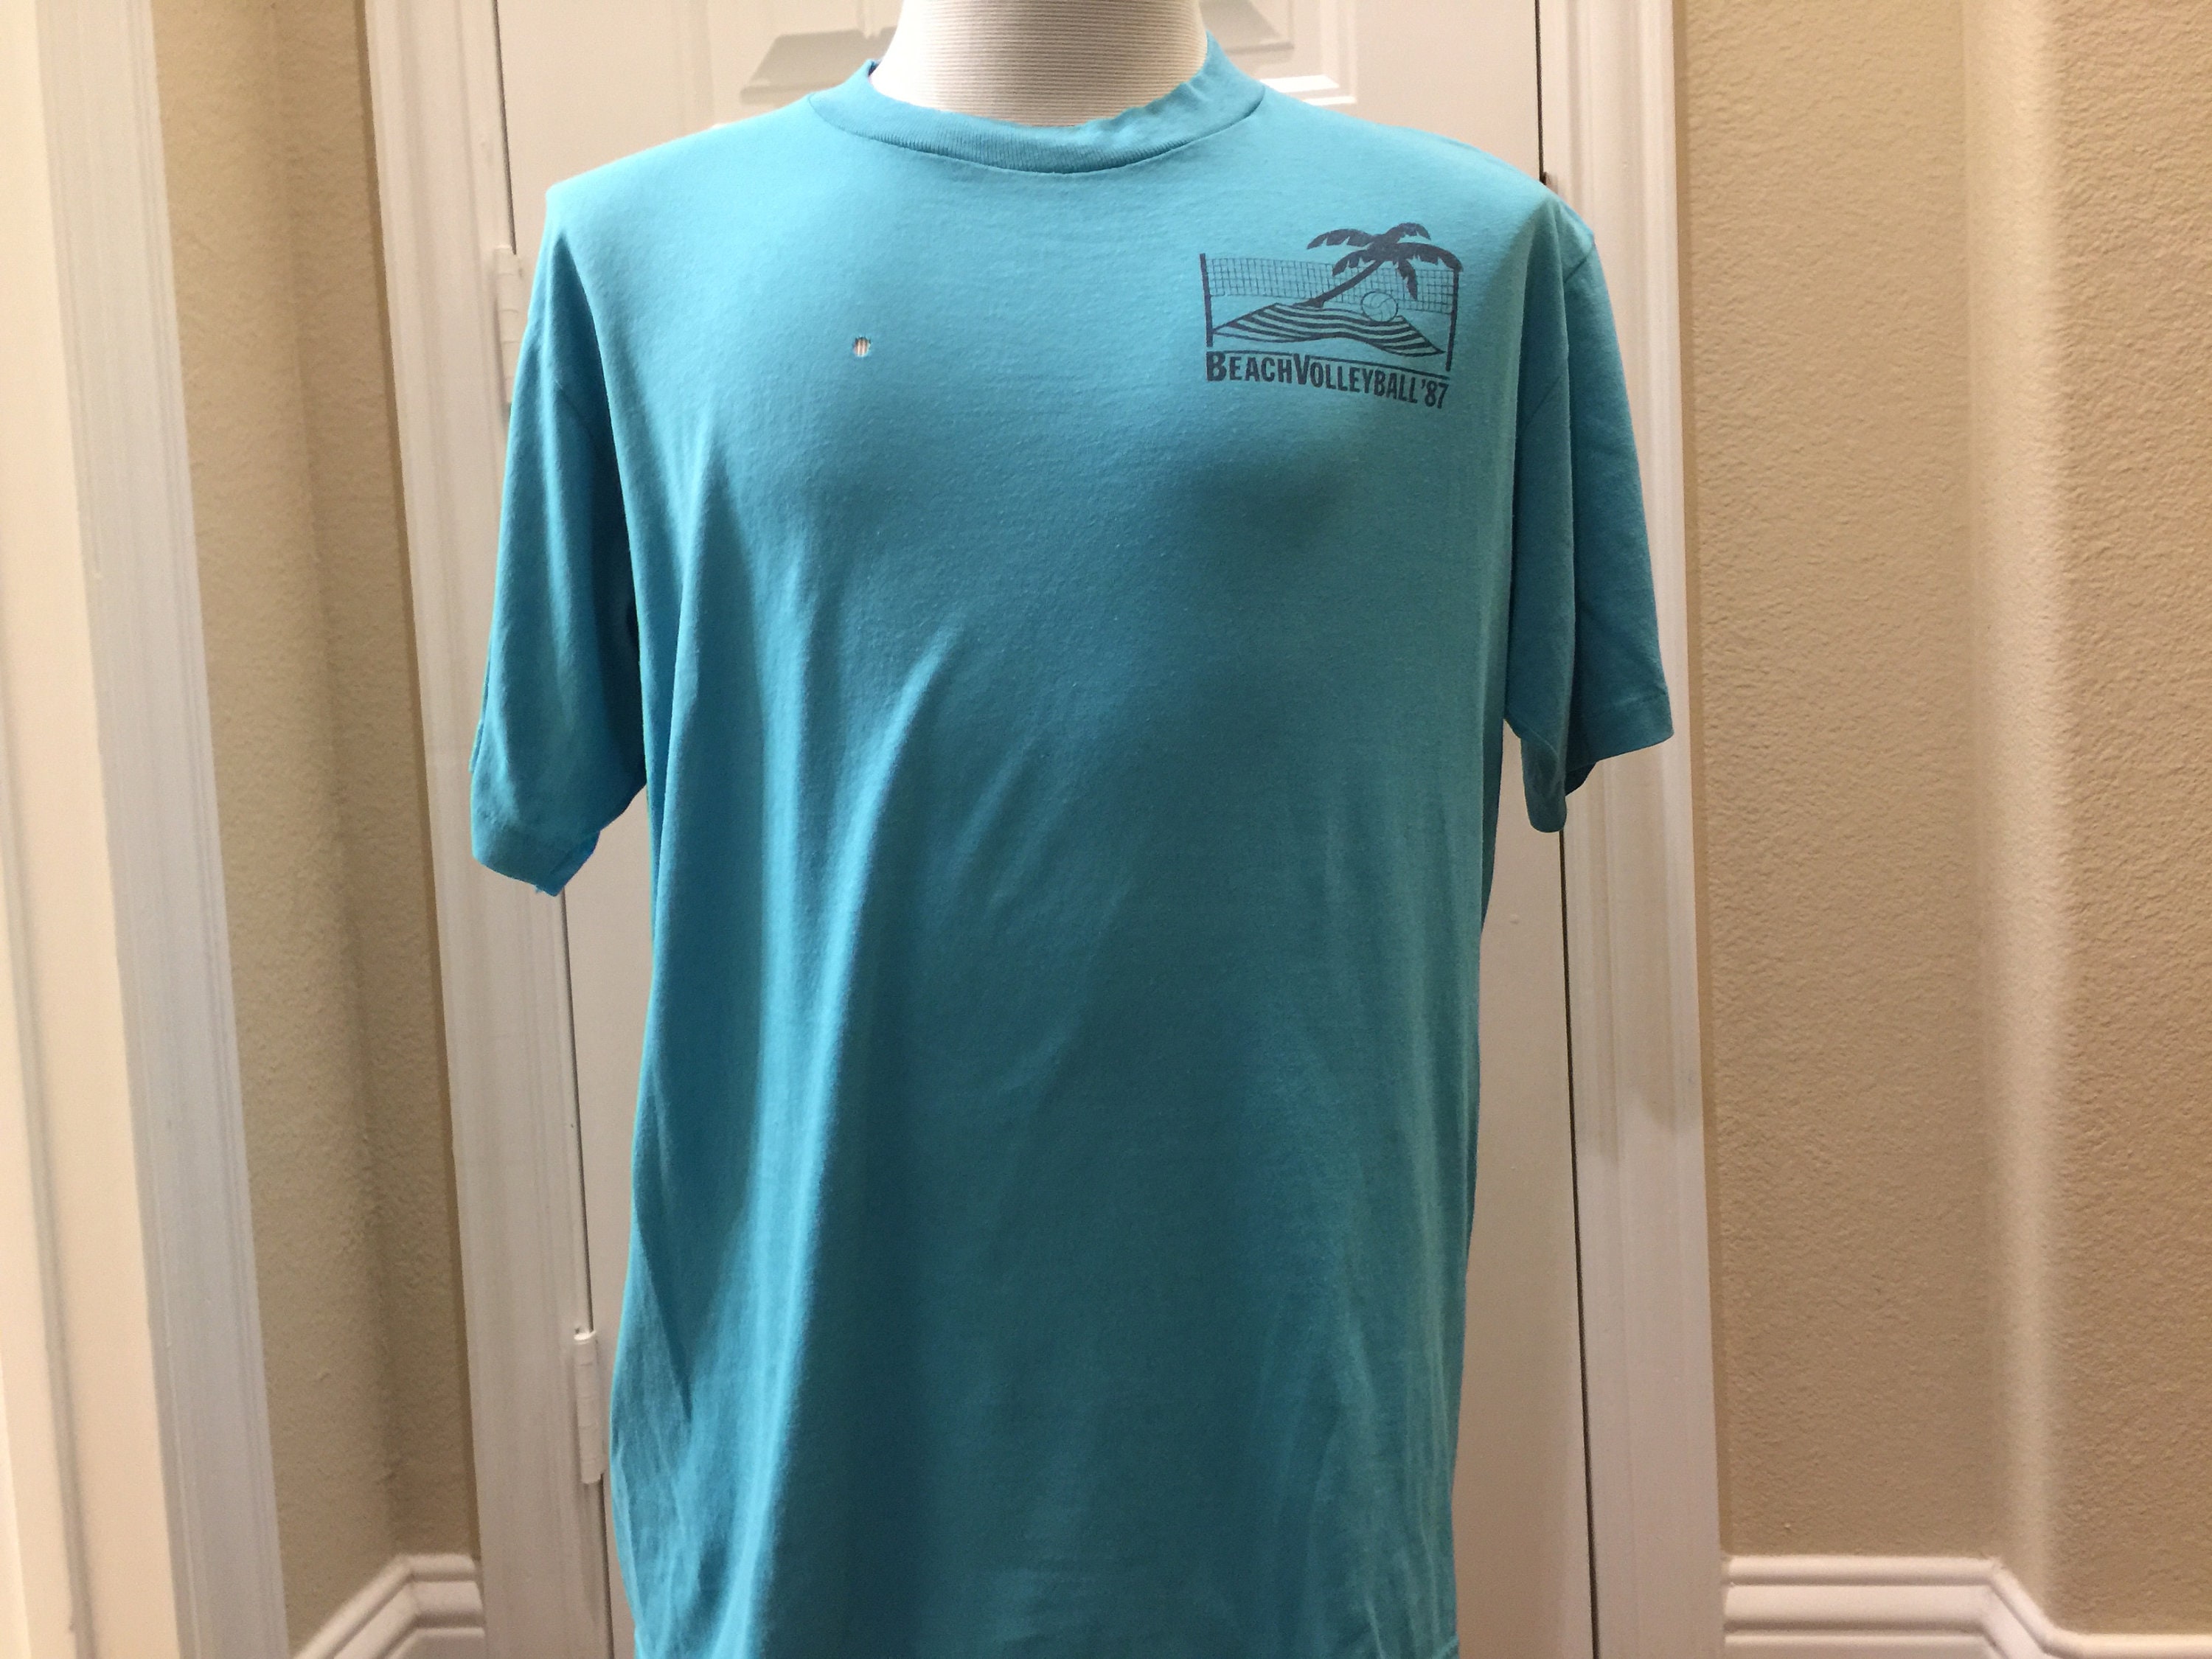 Vintage 80's Gulf Coast Beach Volleyball Teal T Shirt Size - Etsy